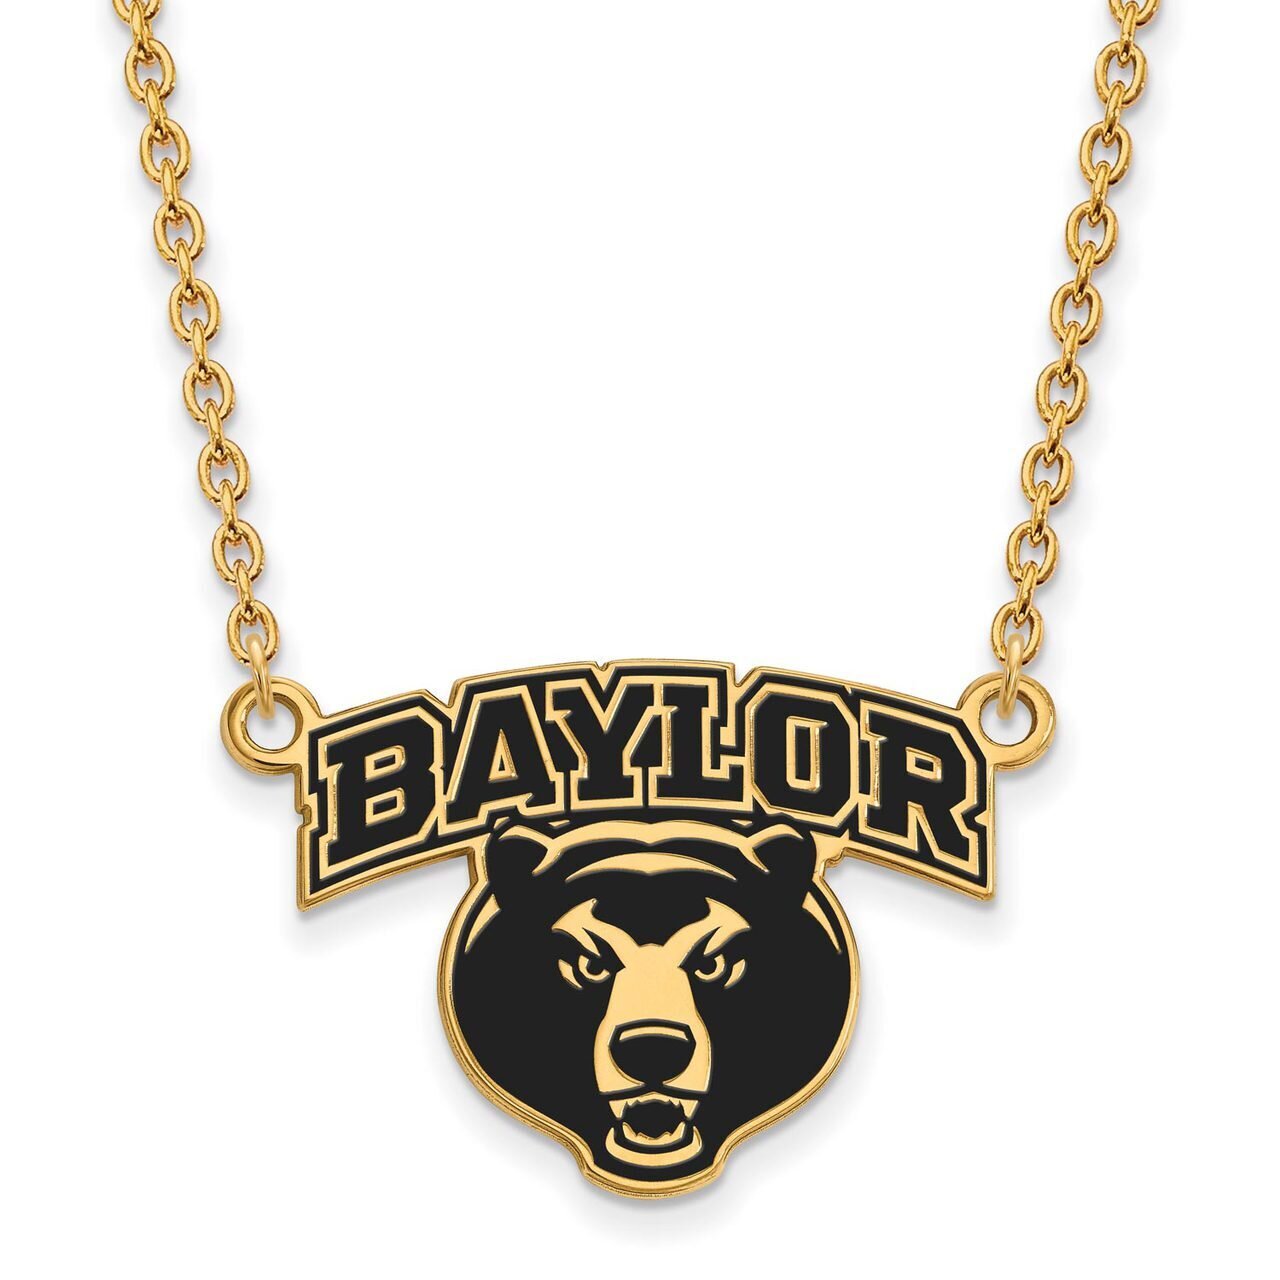 Baylor University Large Enamel Pendant with Chain Necklace Gold-plated Silver GP051BU-18